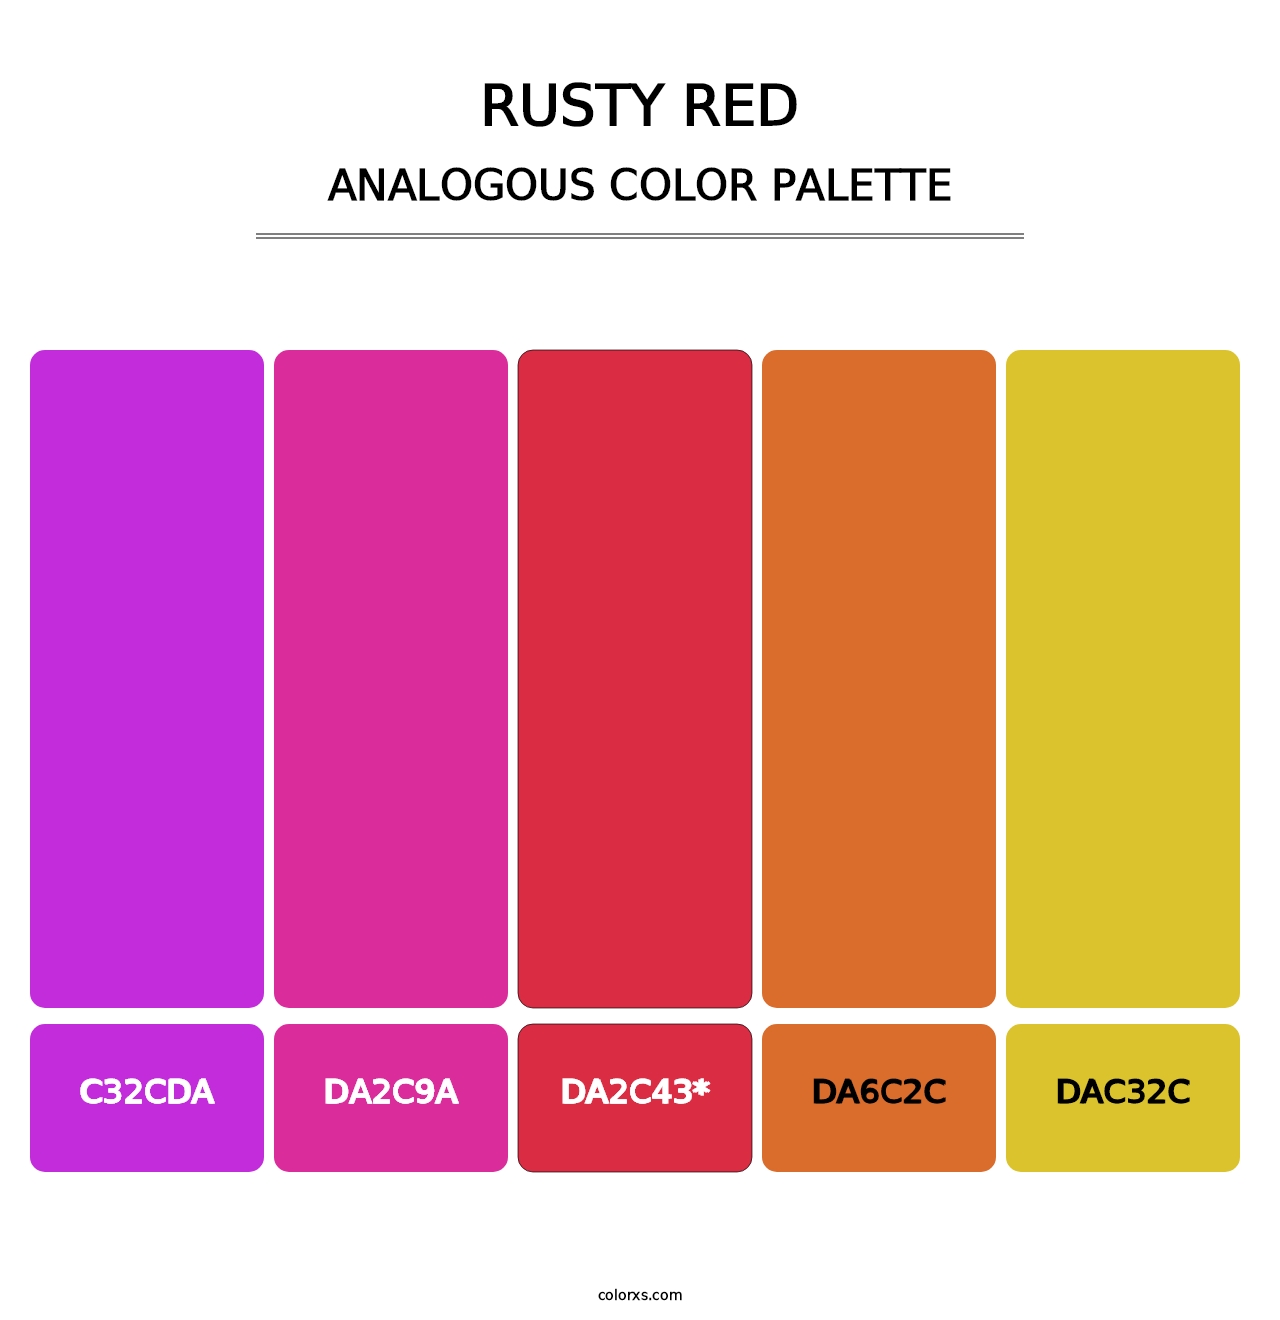 Rusty Red - Analogous Color Palette